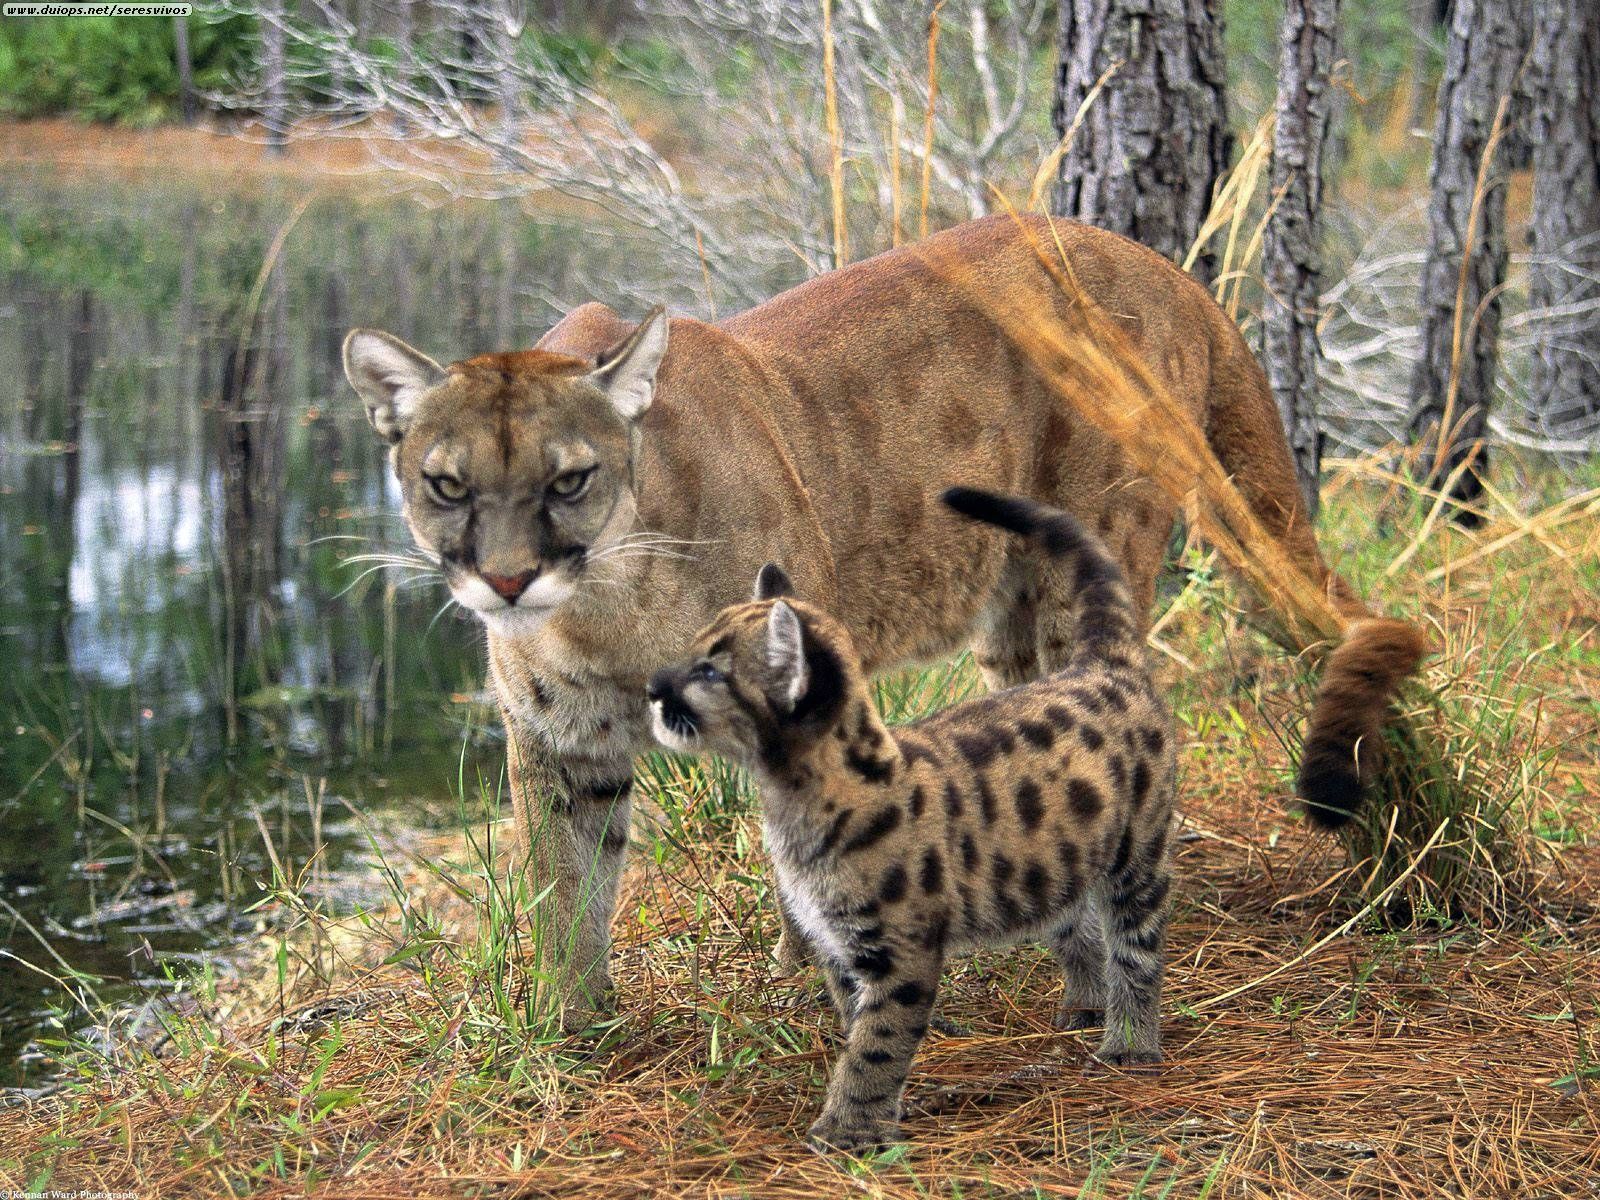 tiredearth-development-project-threatens-endangered-florida-panther